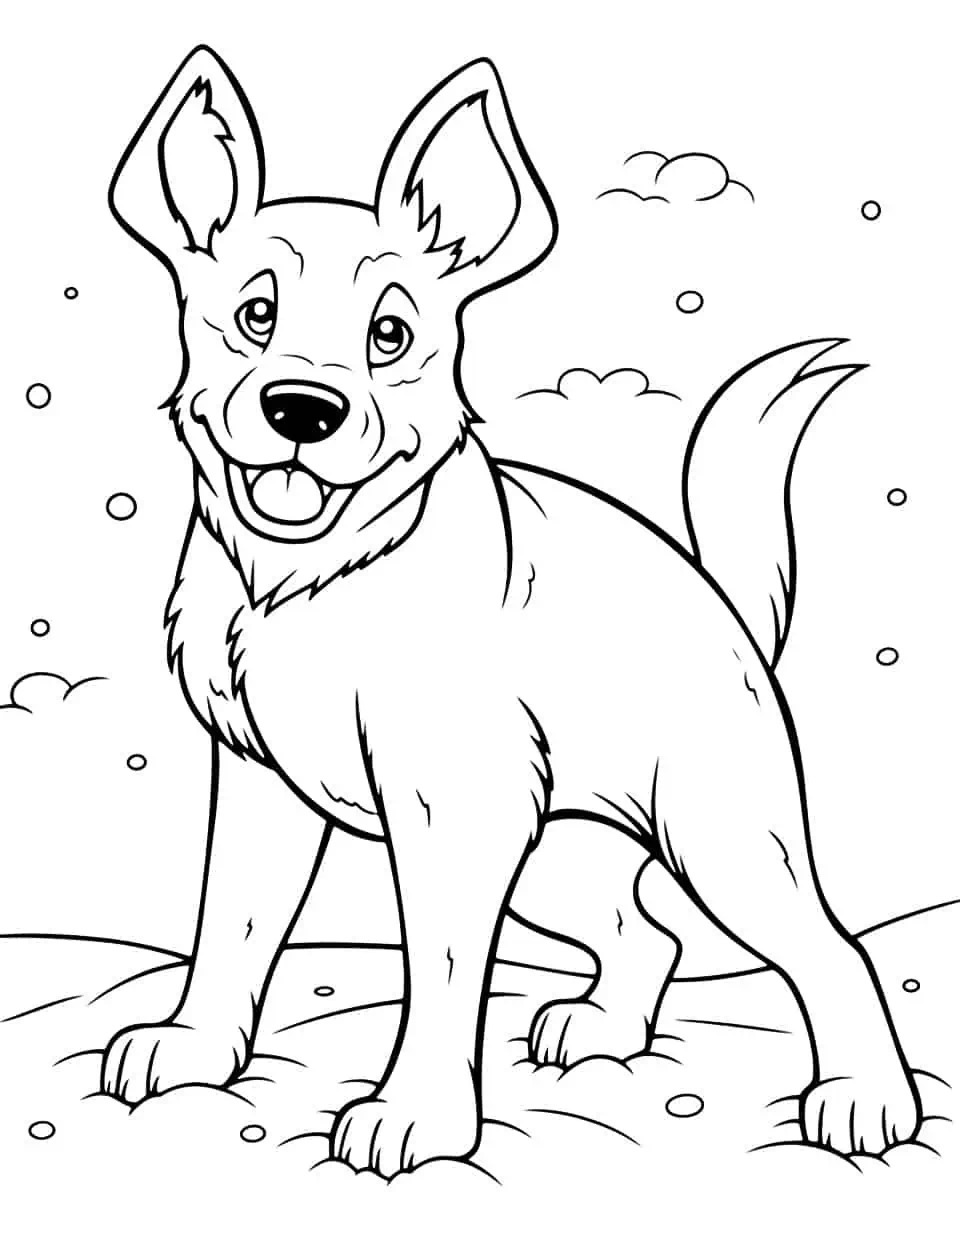 German Shepherd in the Snow Coloring Page - A German Shepherd playing in the snow, trying to catch snowflakes.